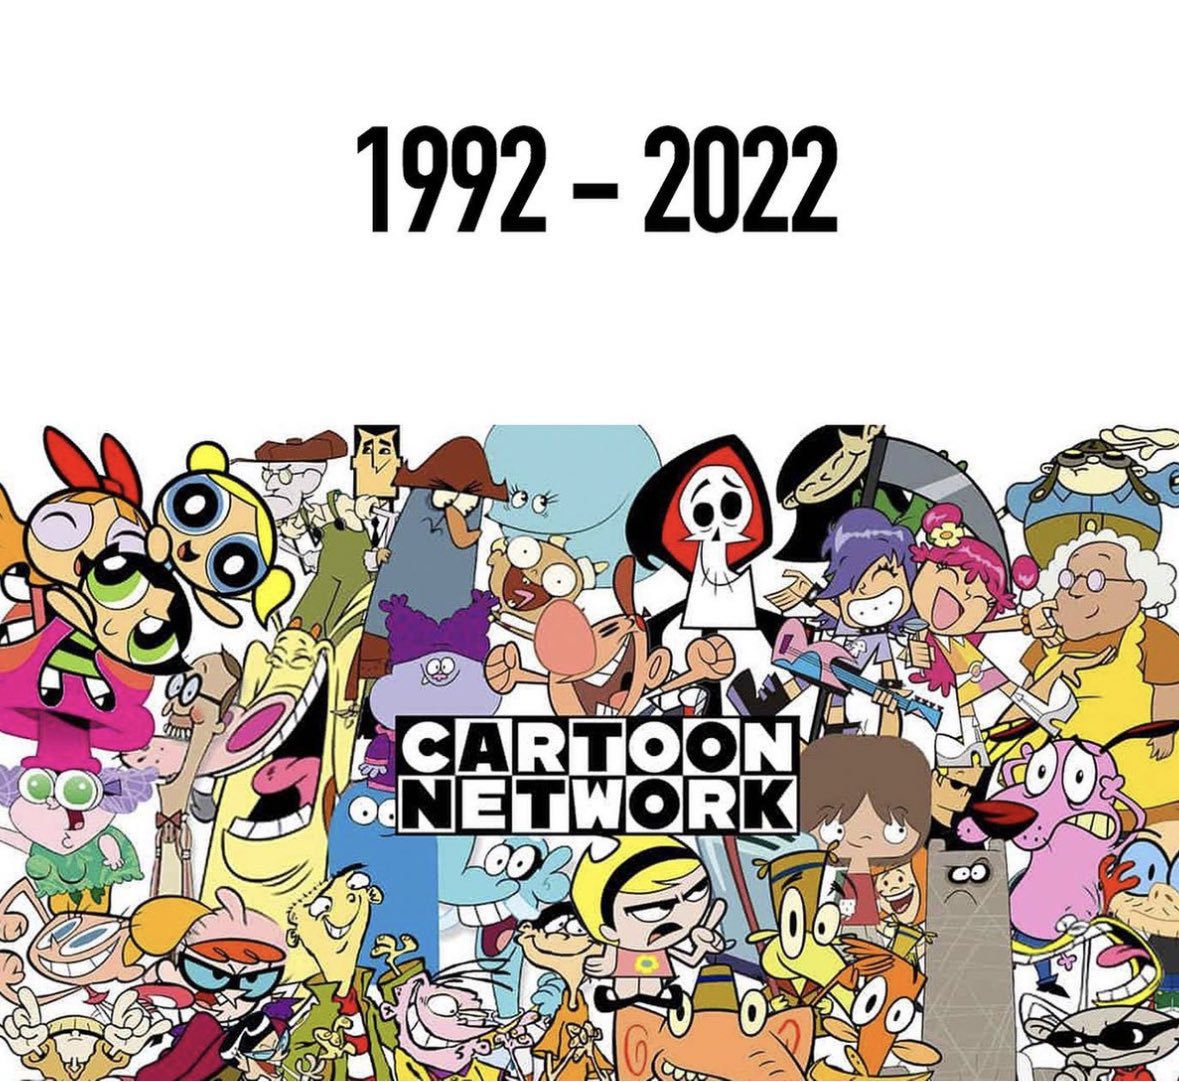 RIP Cartoon Network: Netizens Pay Tribute To Fantastic 30 Years